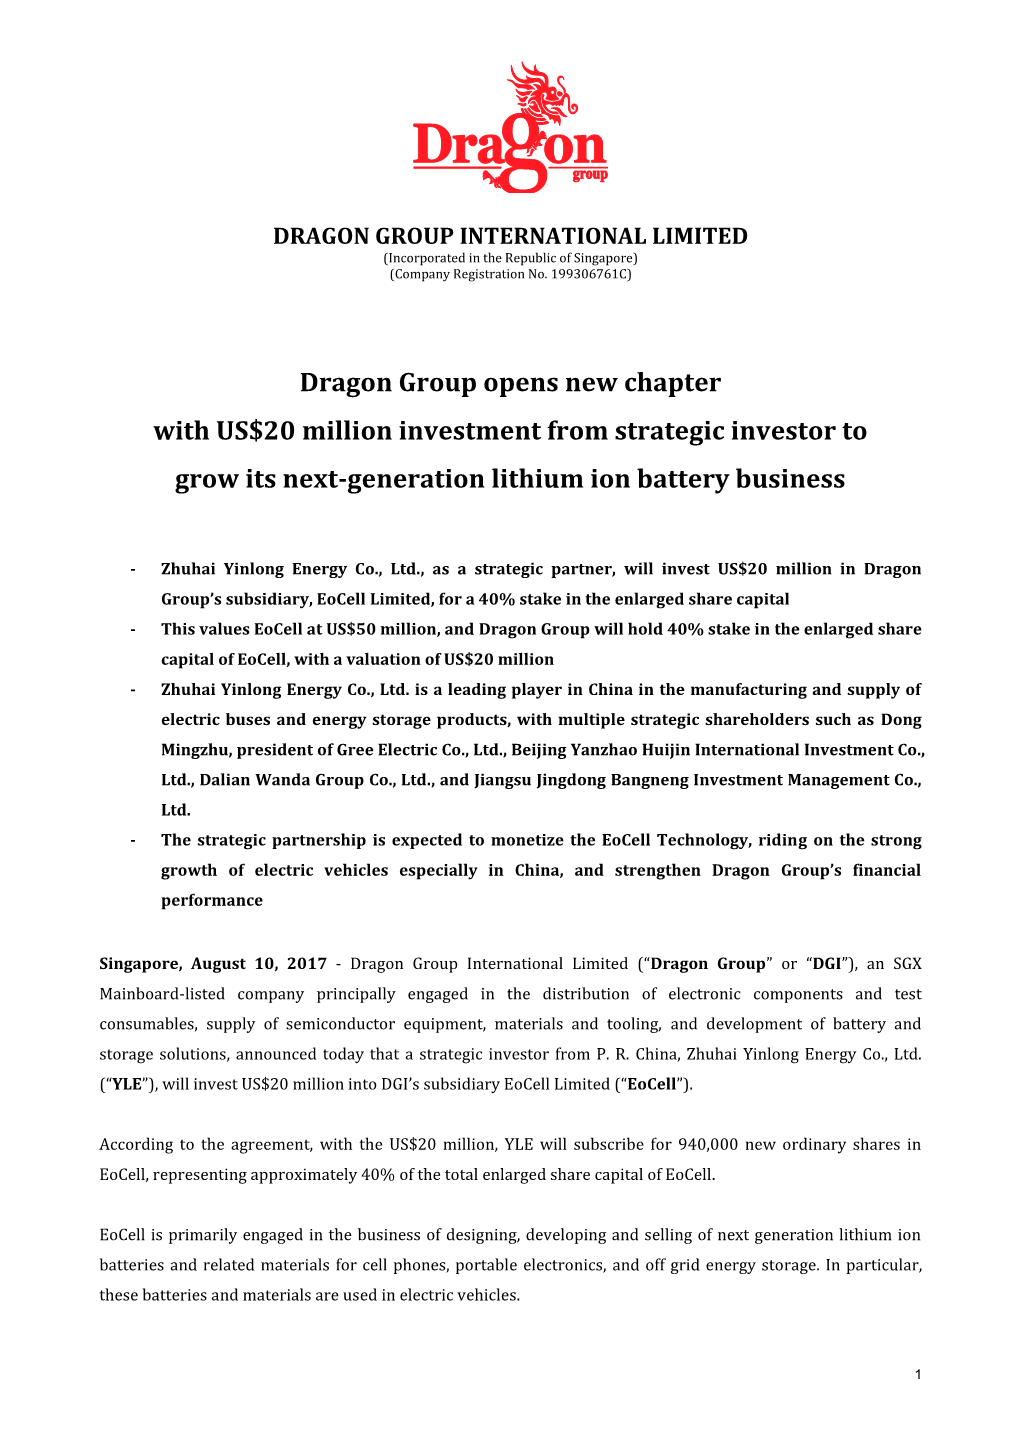 Dragon Group Opens New Chapter with US$20 Million Investment from Strategic Investor to Grow Its Next-Generation Lithium Ion Battery Business